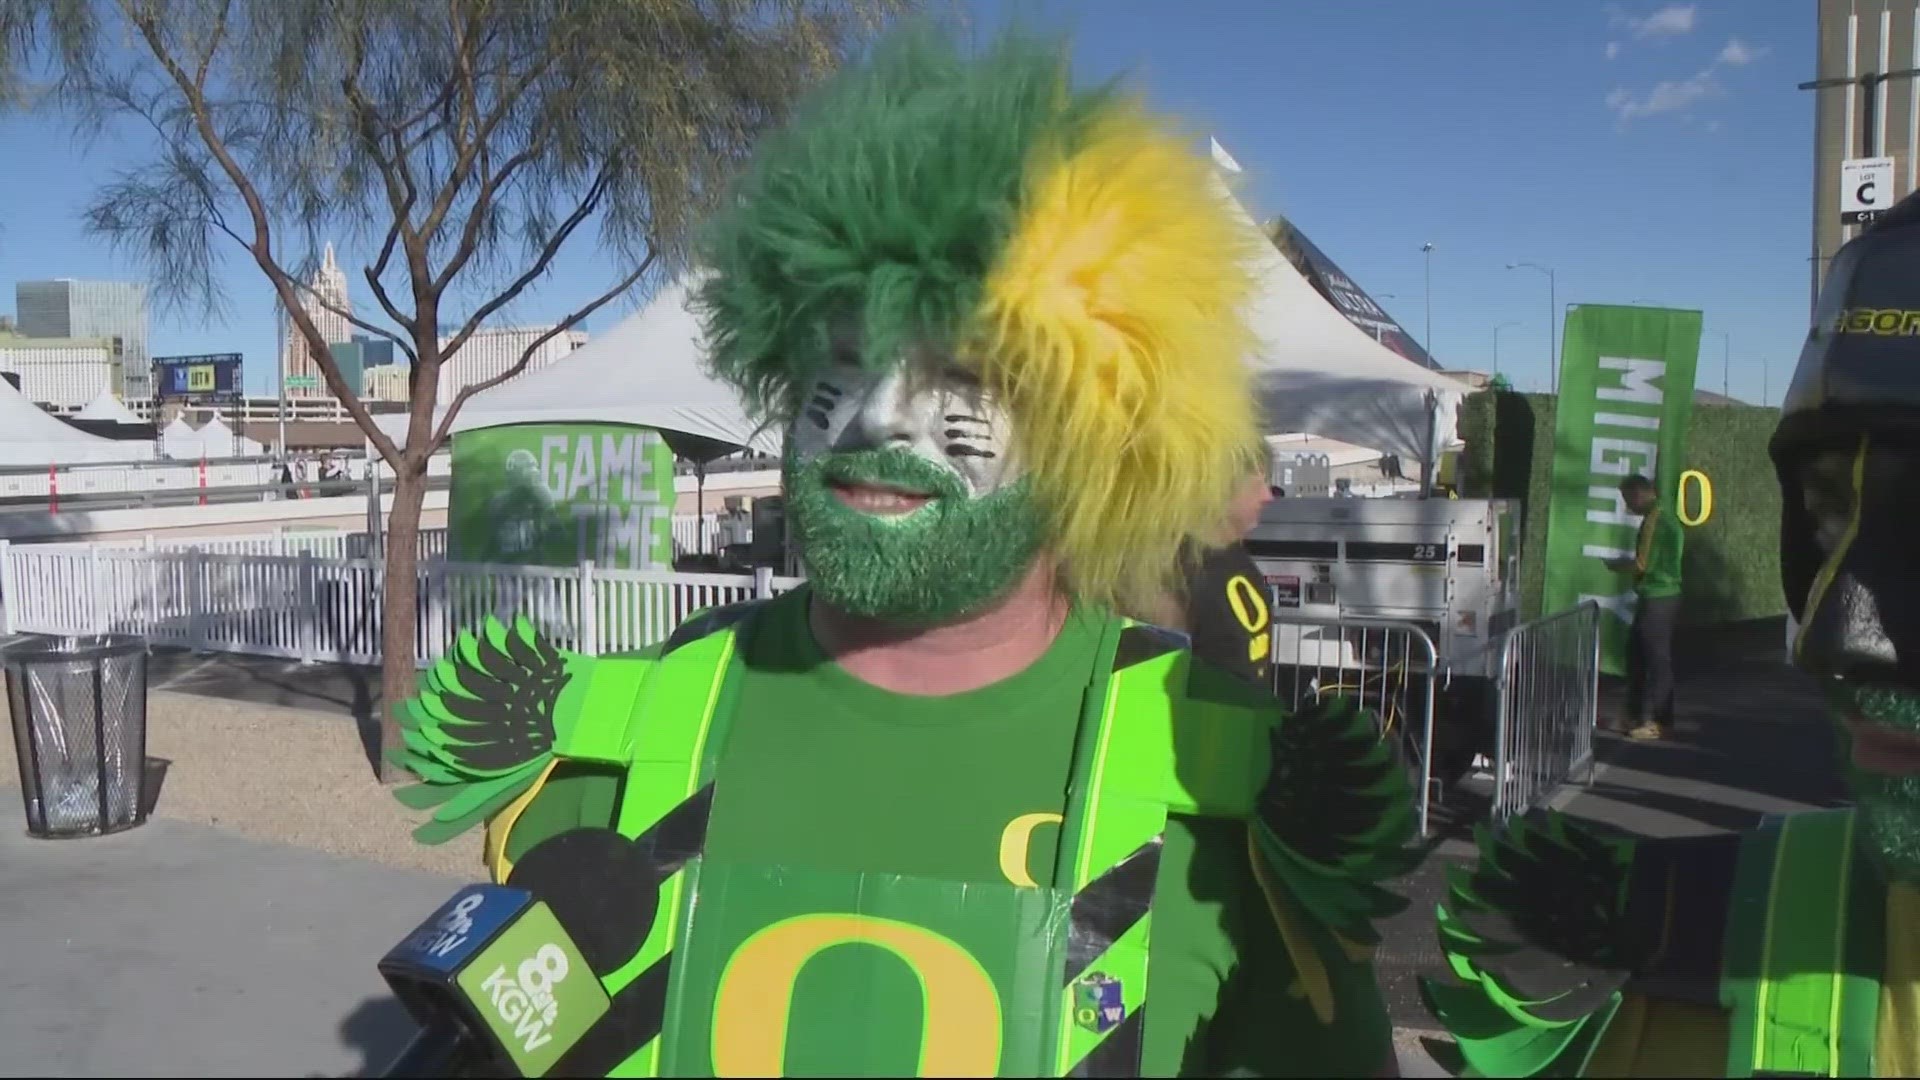 Outside of Allegiant Stadium in Vegas, Oregon Ducks fans are gearing up for the game with the Washington Huskies.